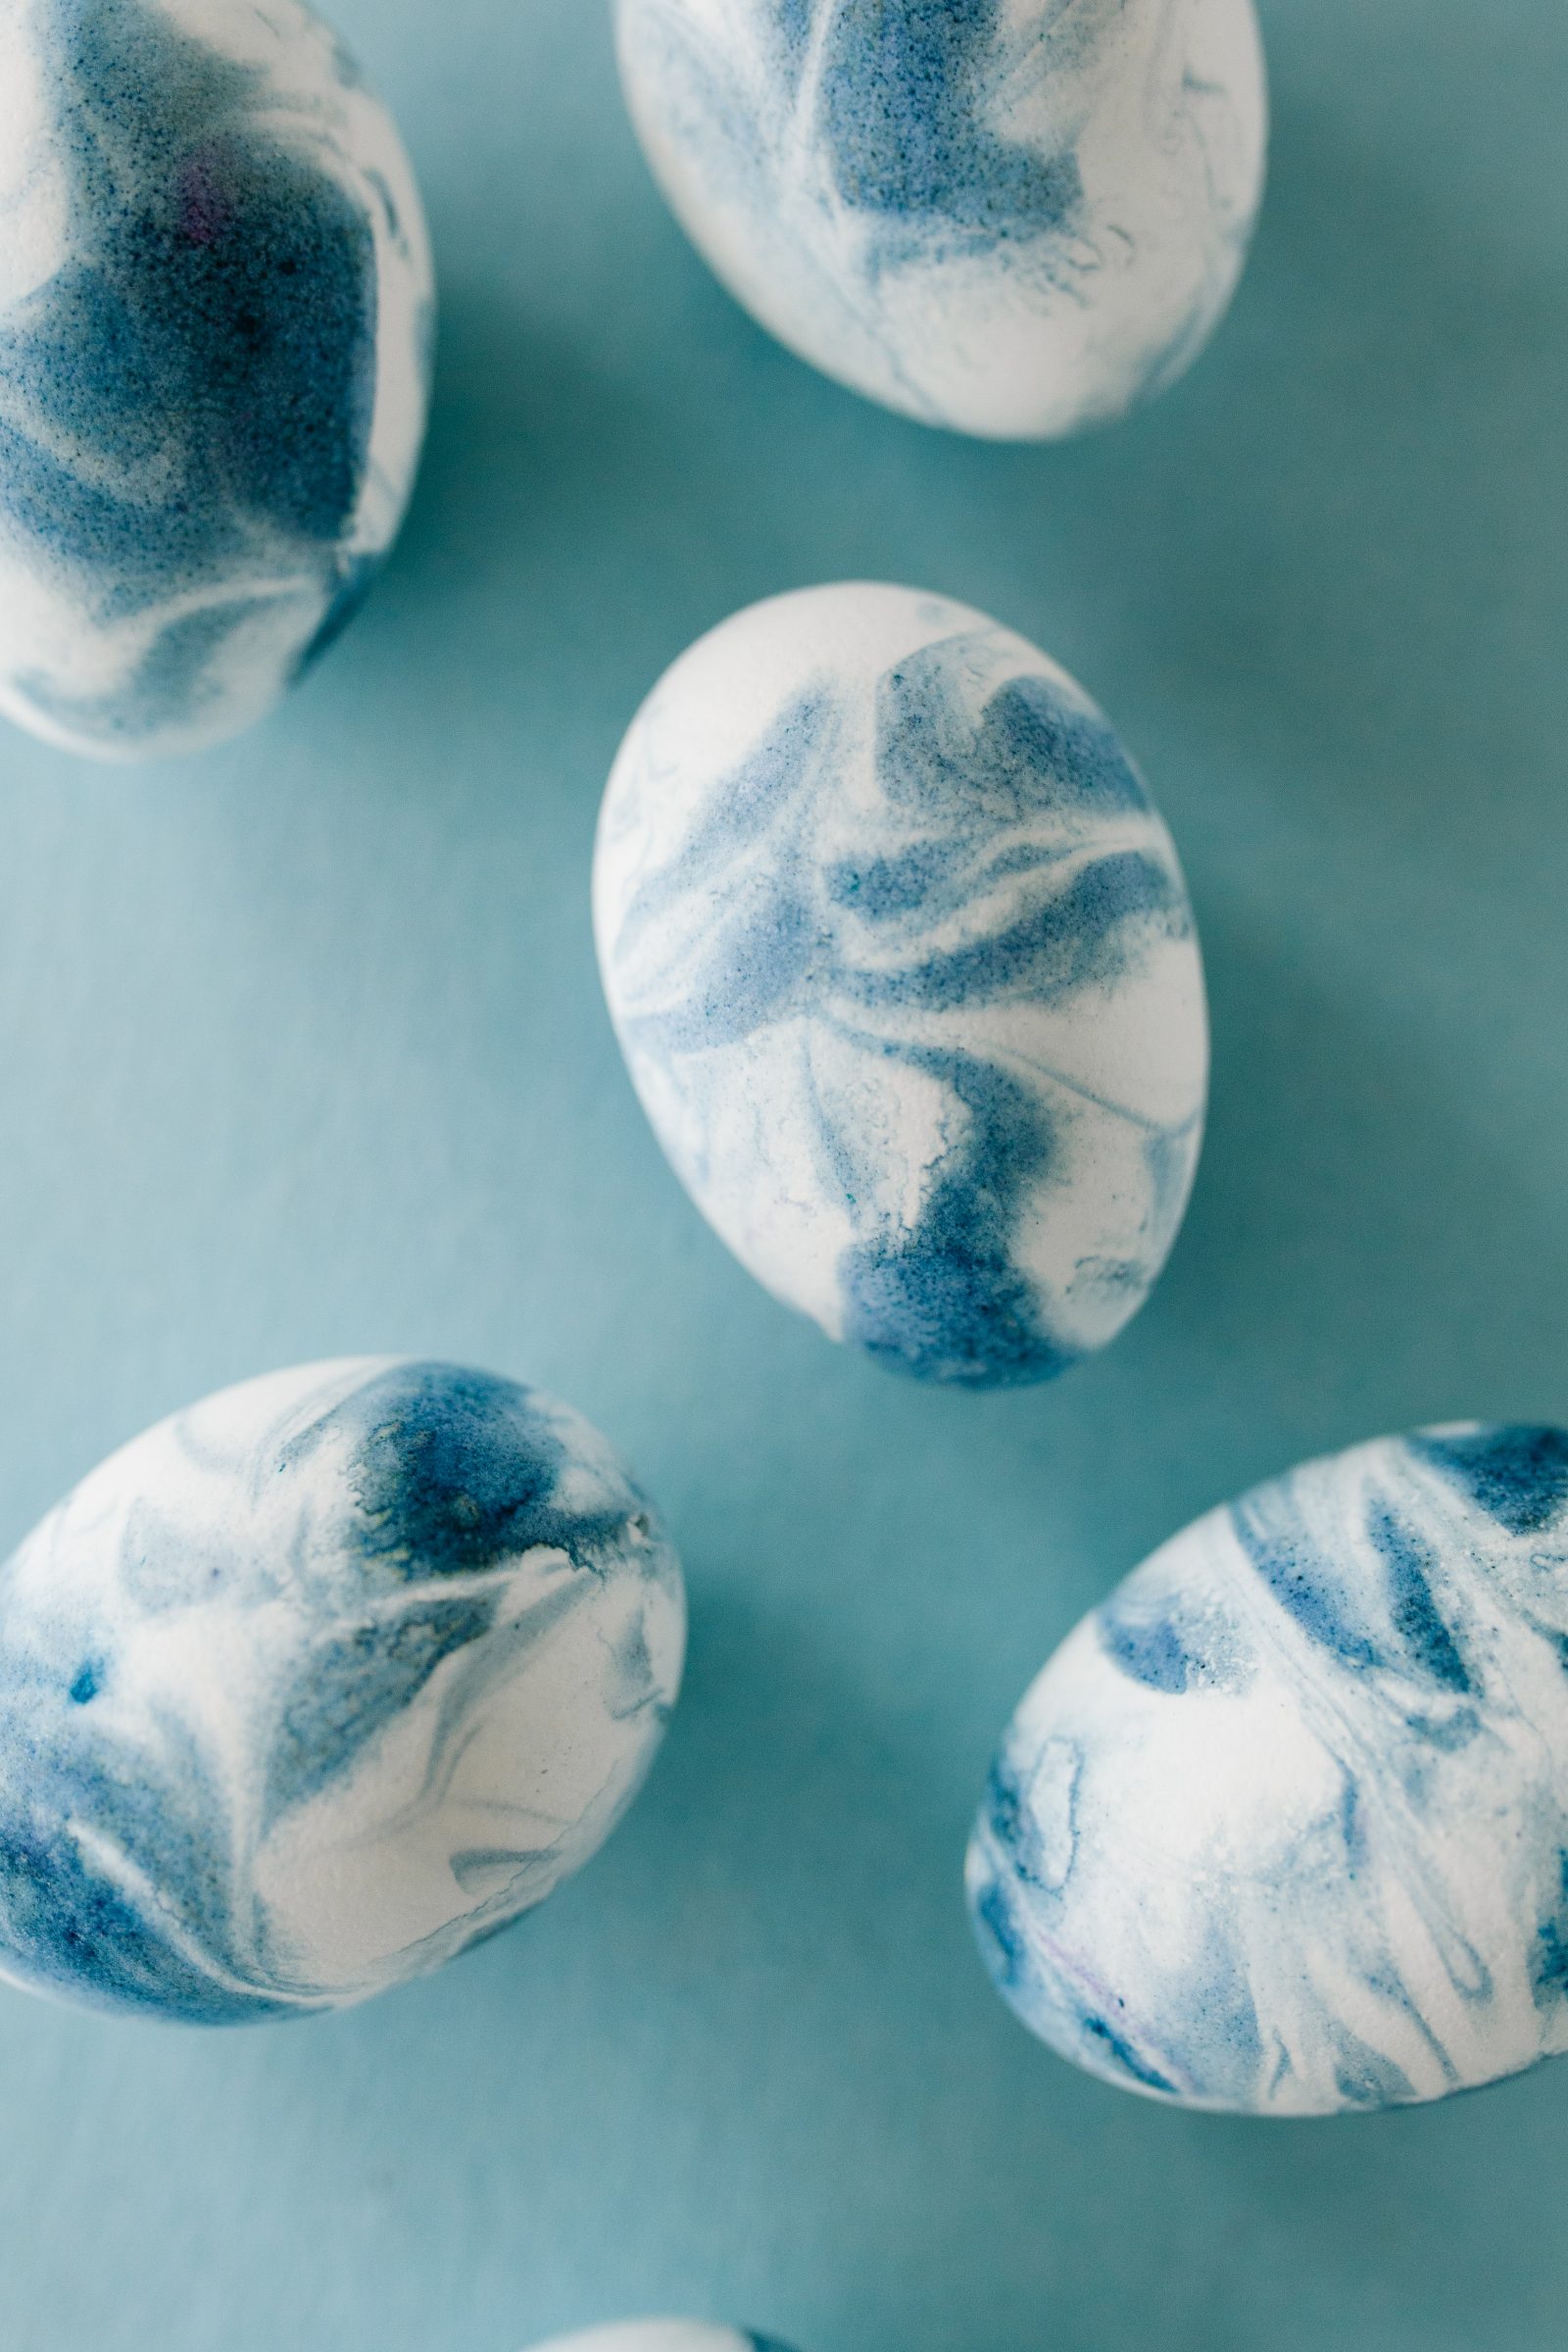 How to Make Marbled Eggs with Shaving Cream or Whipped Cream - How to Dye Easter  Eggs